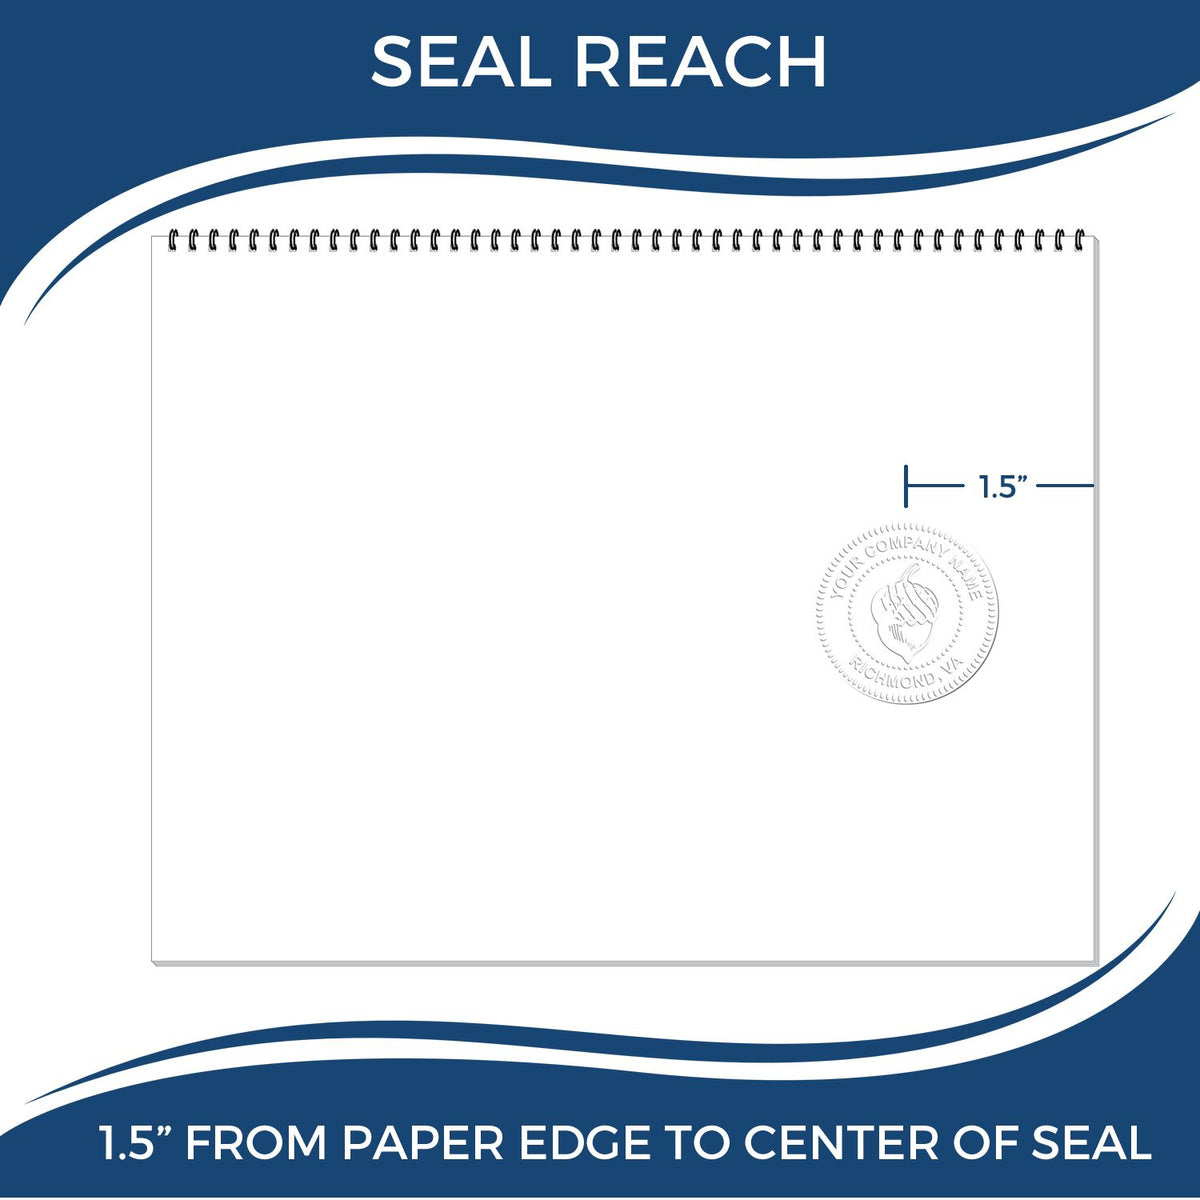 An infographic showing the seal reach which is represented by a ruler and a miniature seal image of the Soft Connecticut Professional Geologist Seal